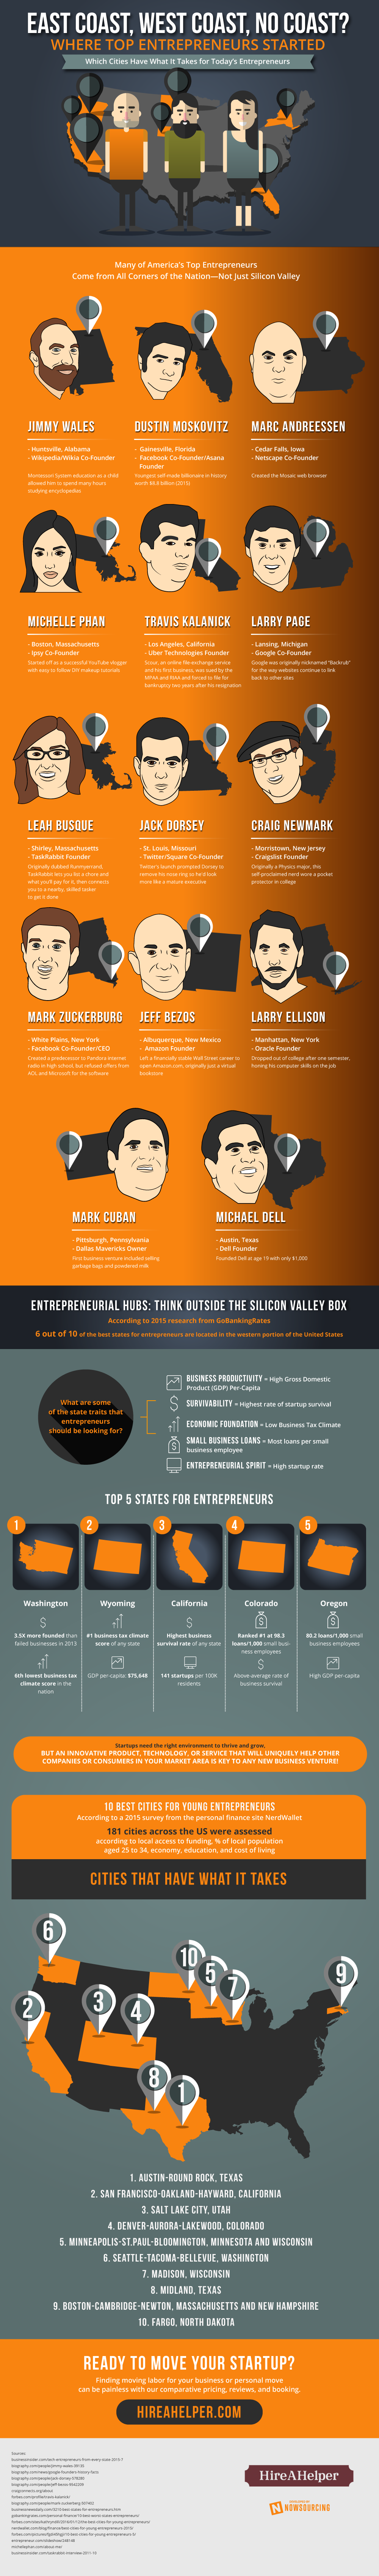 Where Do Your Favorite Entrepreneurs Come From?